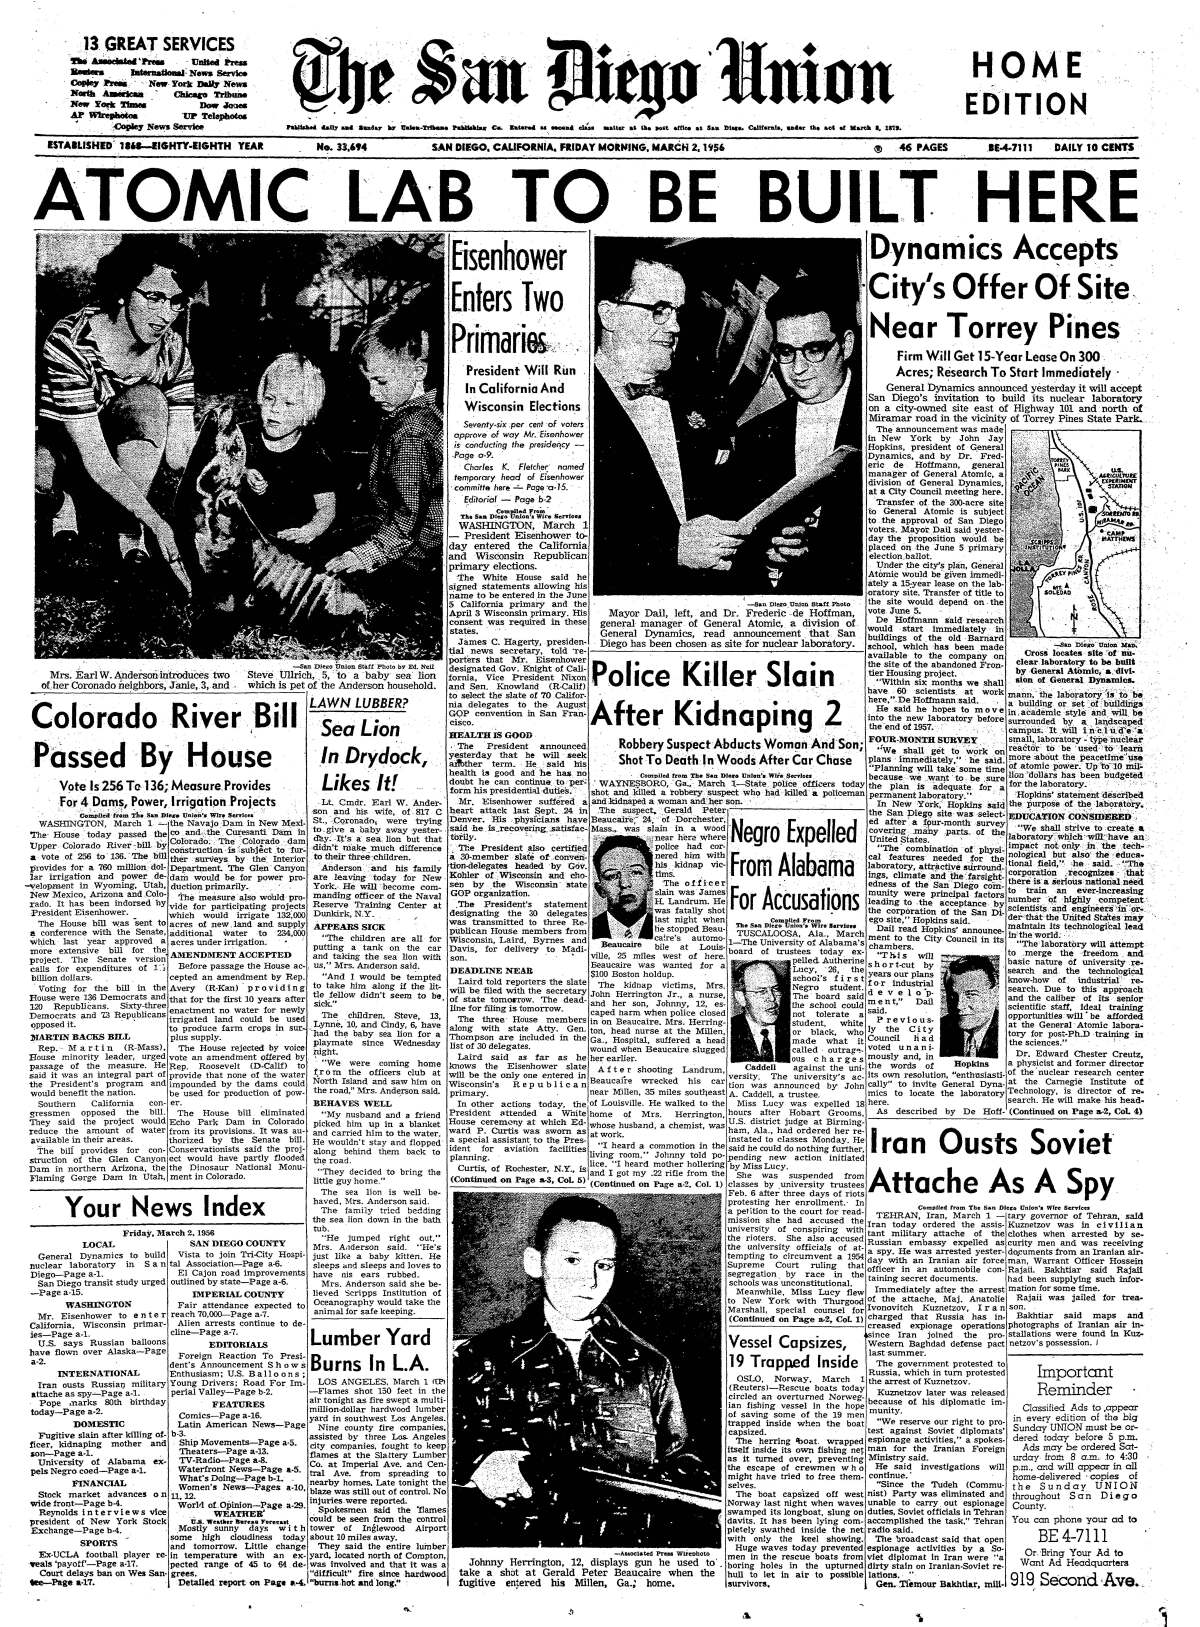 March 2, 1956 front page of the Union 